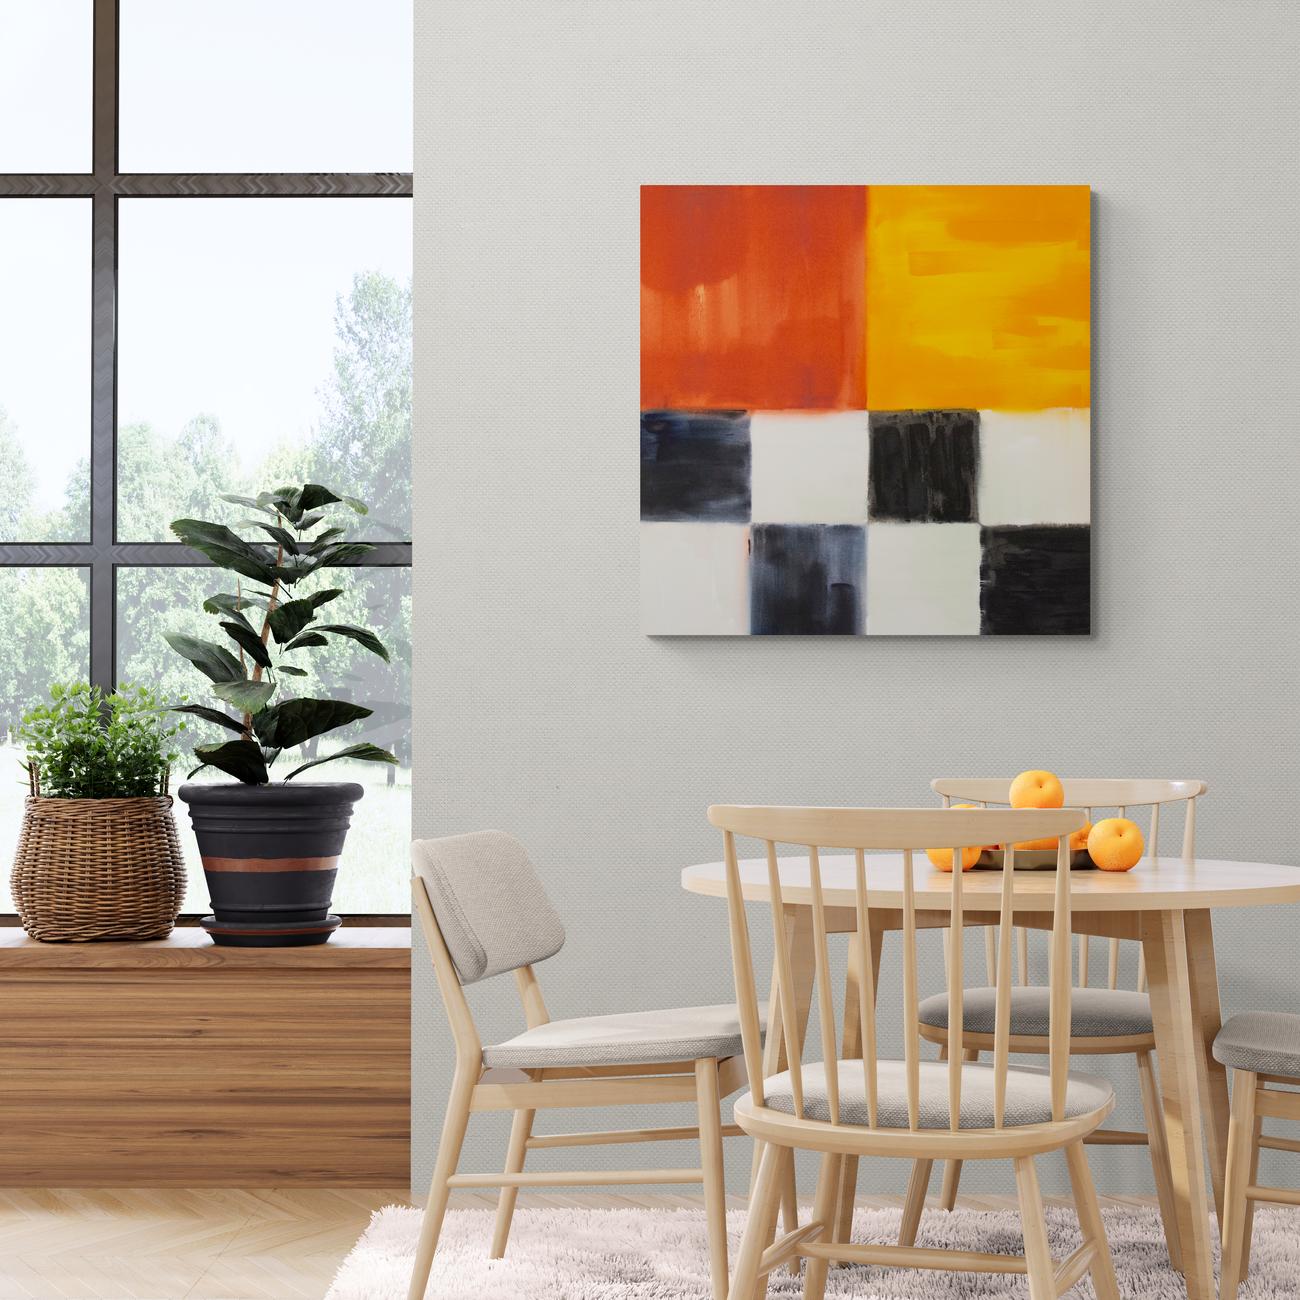 A grid of painterly black and white is balanced with large squares of fiery orange and gold each in this bold canvas by Milly Ristvedt. The edges of the squares pulse back and forth within the structured composition. 

Milly Ristvedt (b. 1942,